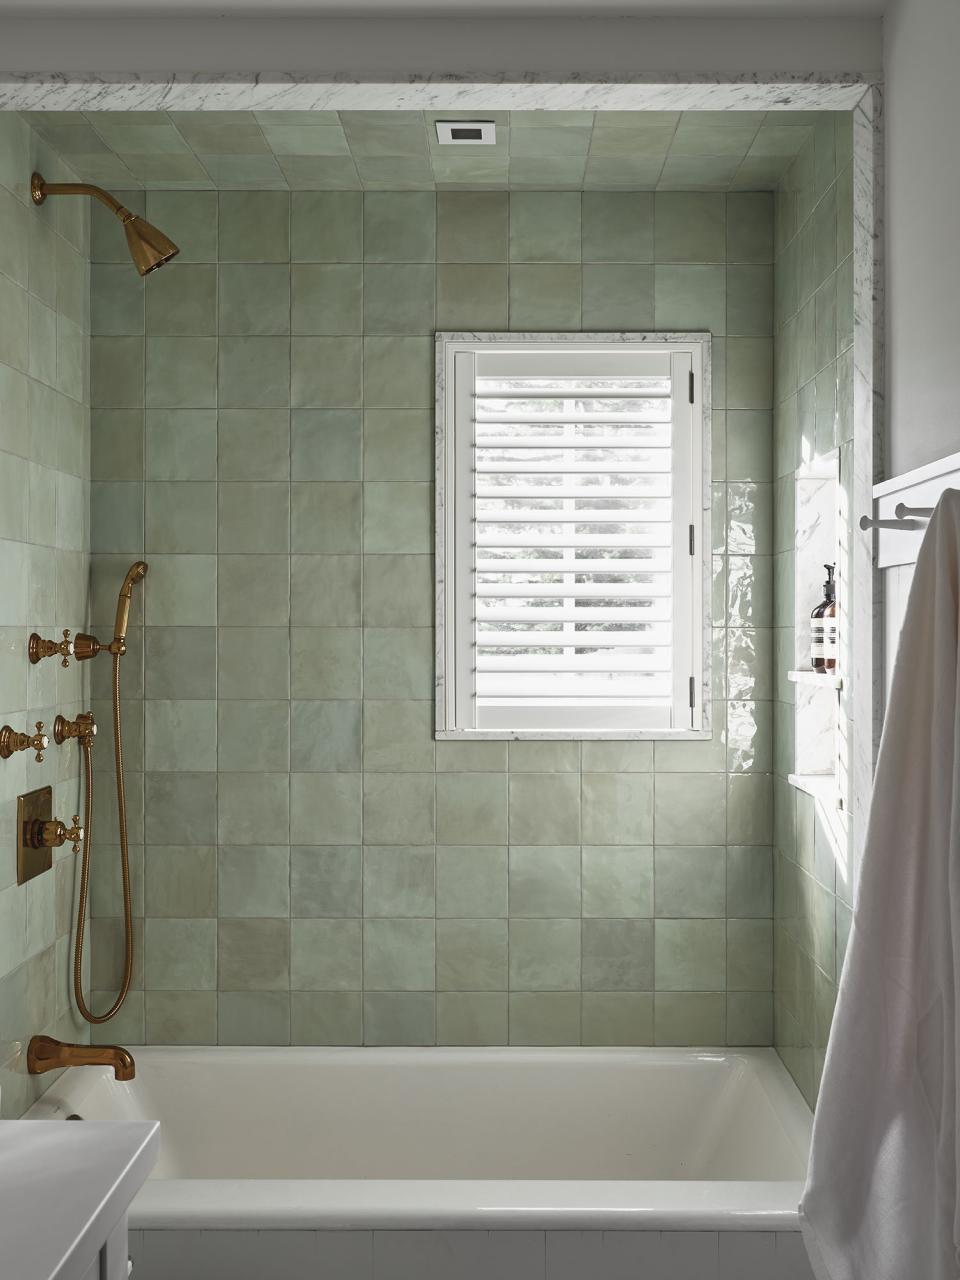 Or install an ethereal tiled shower